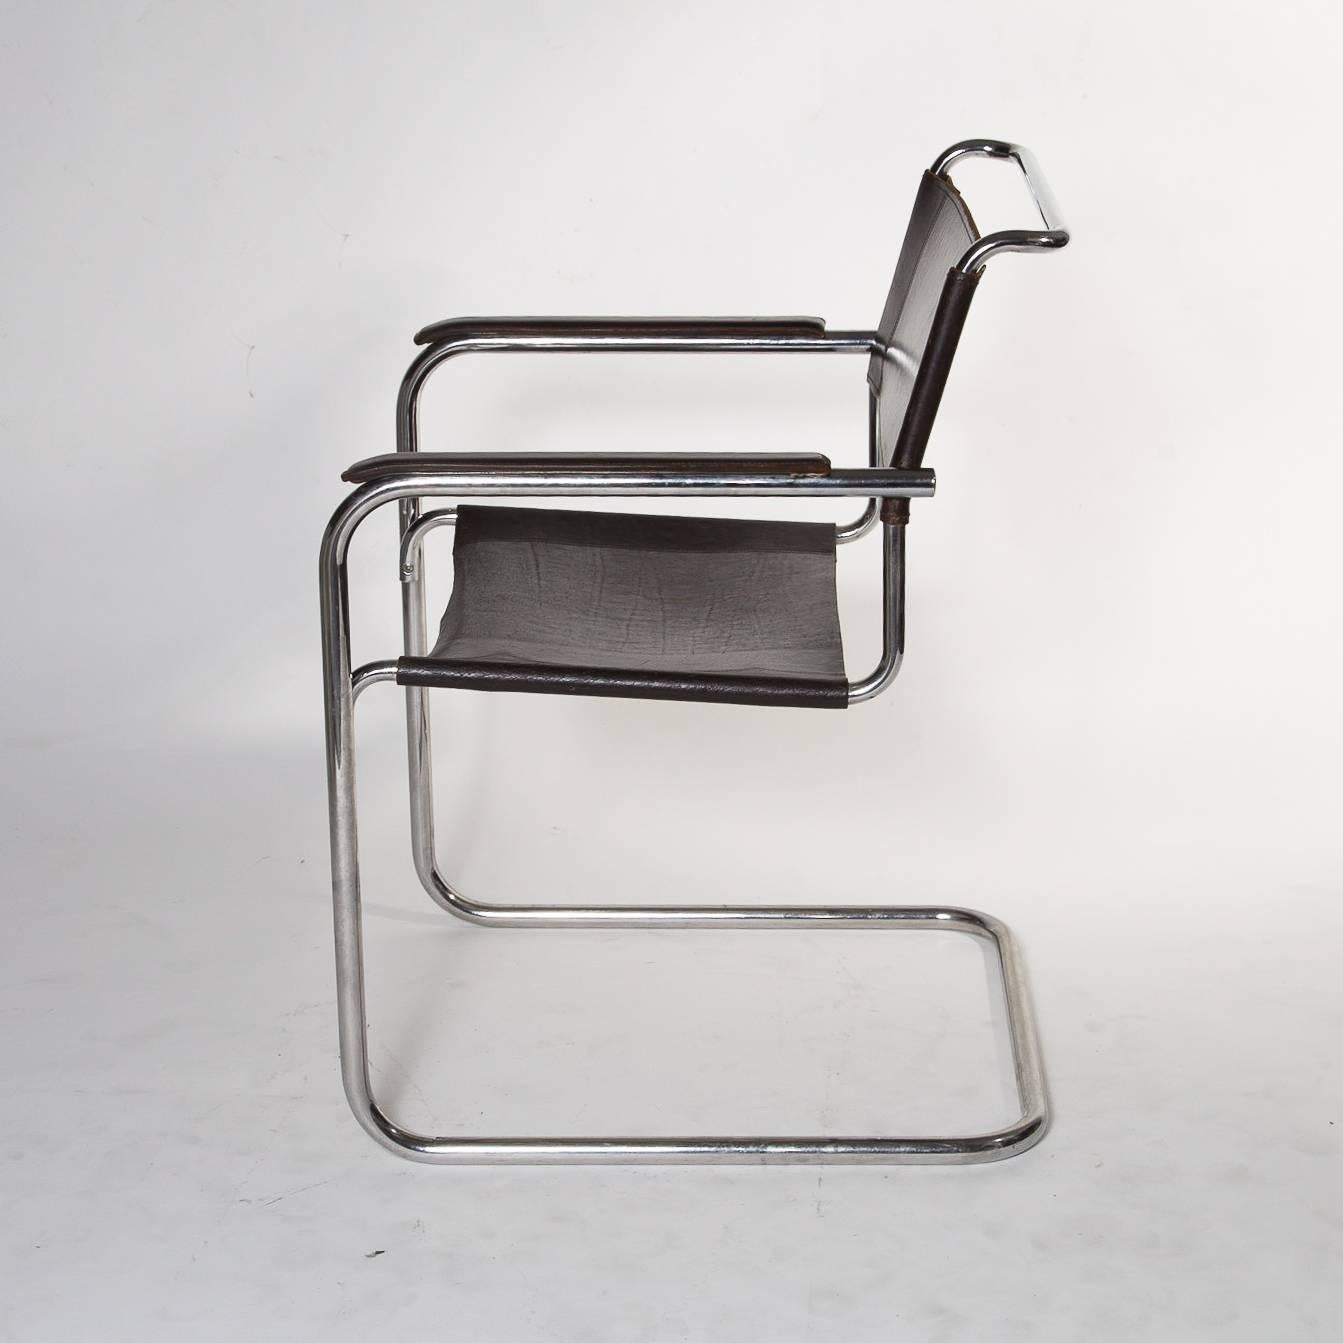 The Cantilever armchairs S34 designed by Mart Stam in 1927 and produced by Thonet in 1985 has a very nice and clean patina.

Blend leather with THONET Brandmark under the seating.
Chromed steel frame without any stains of scratches.
The chair is in